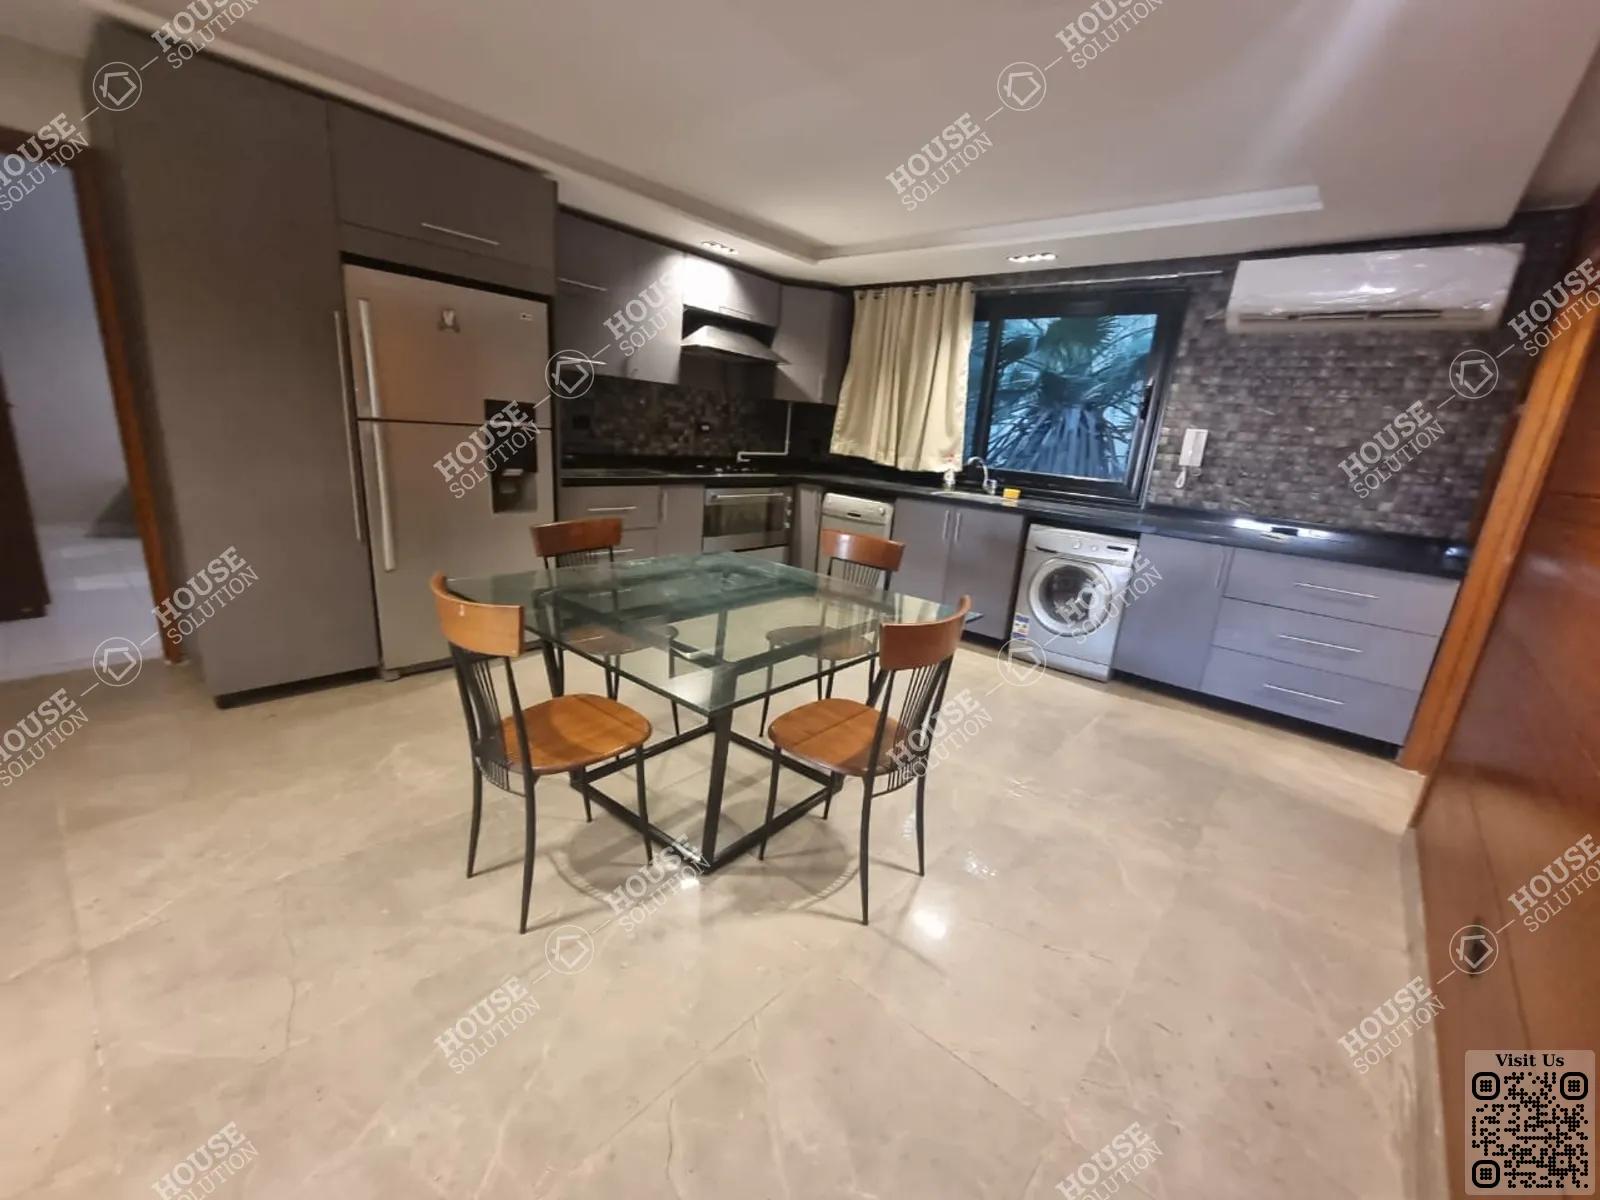 KITCHEN  @ Penthouses For Rent In Maadi Maadi Degla Area: 200 m² consists of 2 Bedrooms 2 Bathrooms Modern furnished 5 stars #5077-2